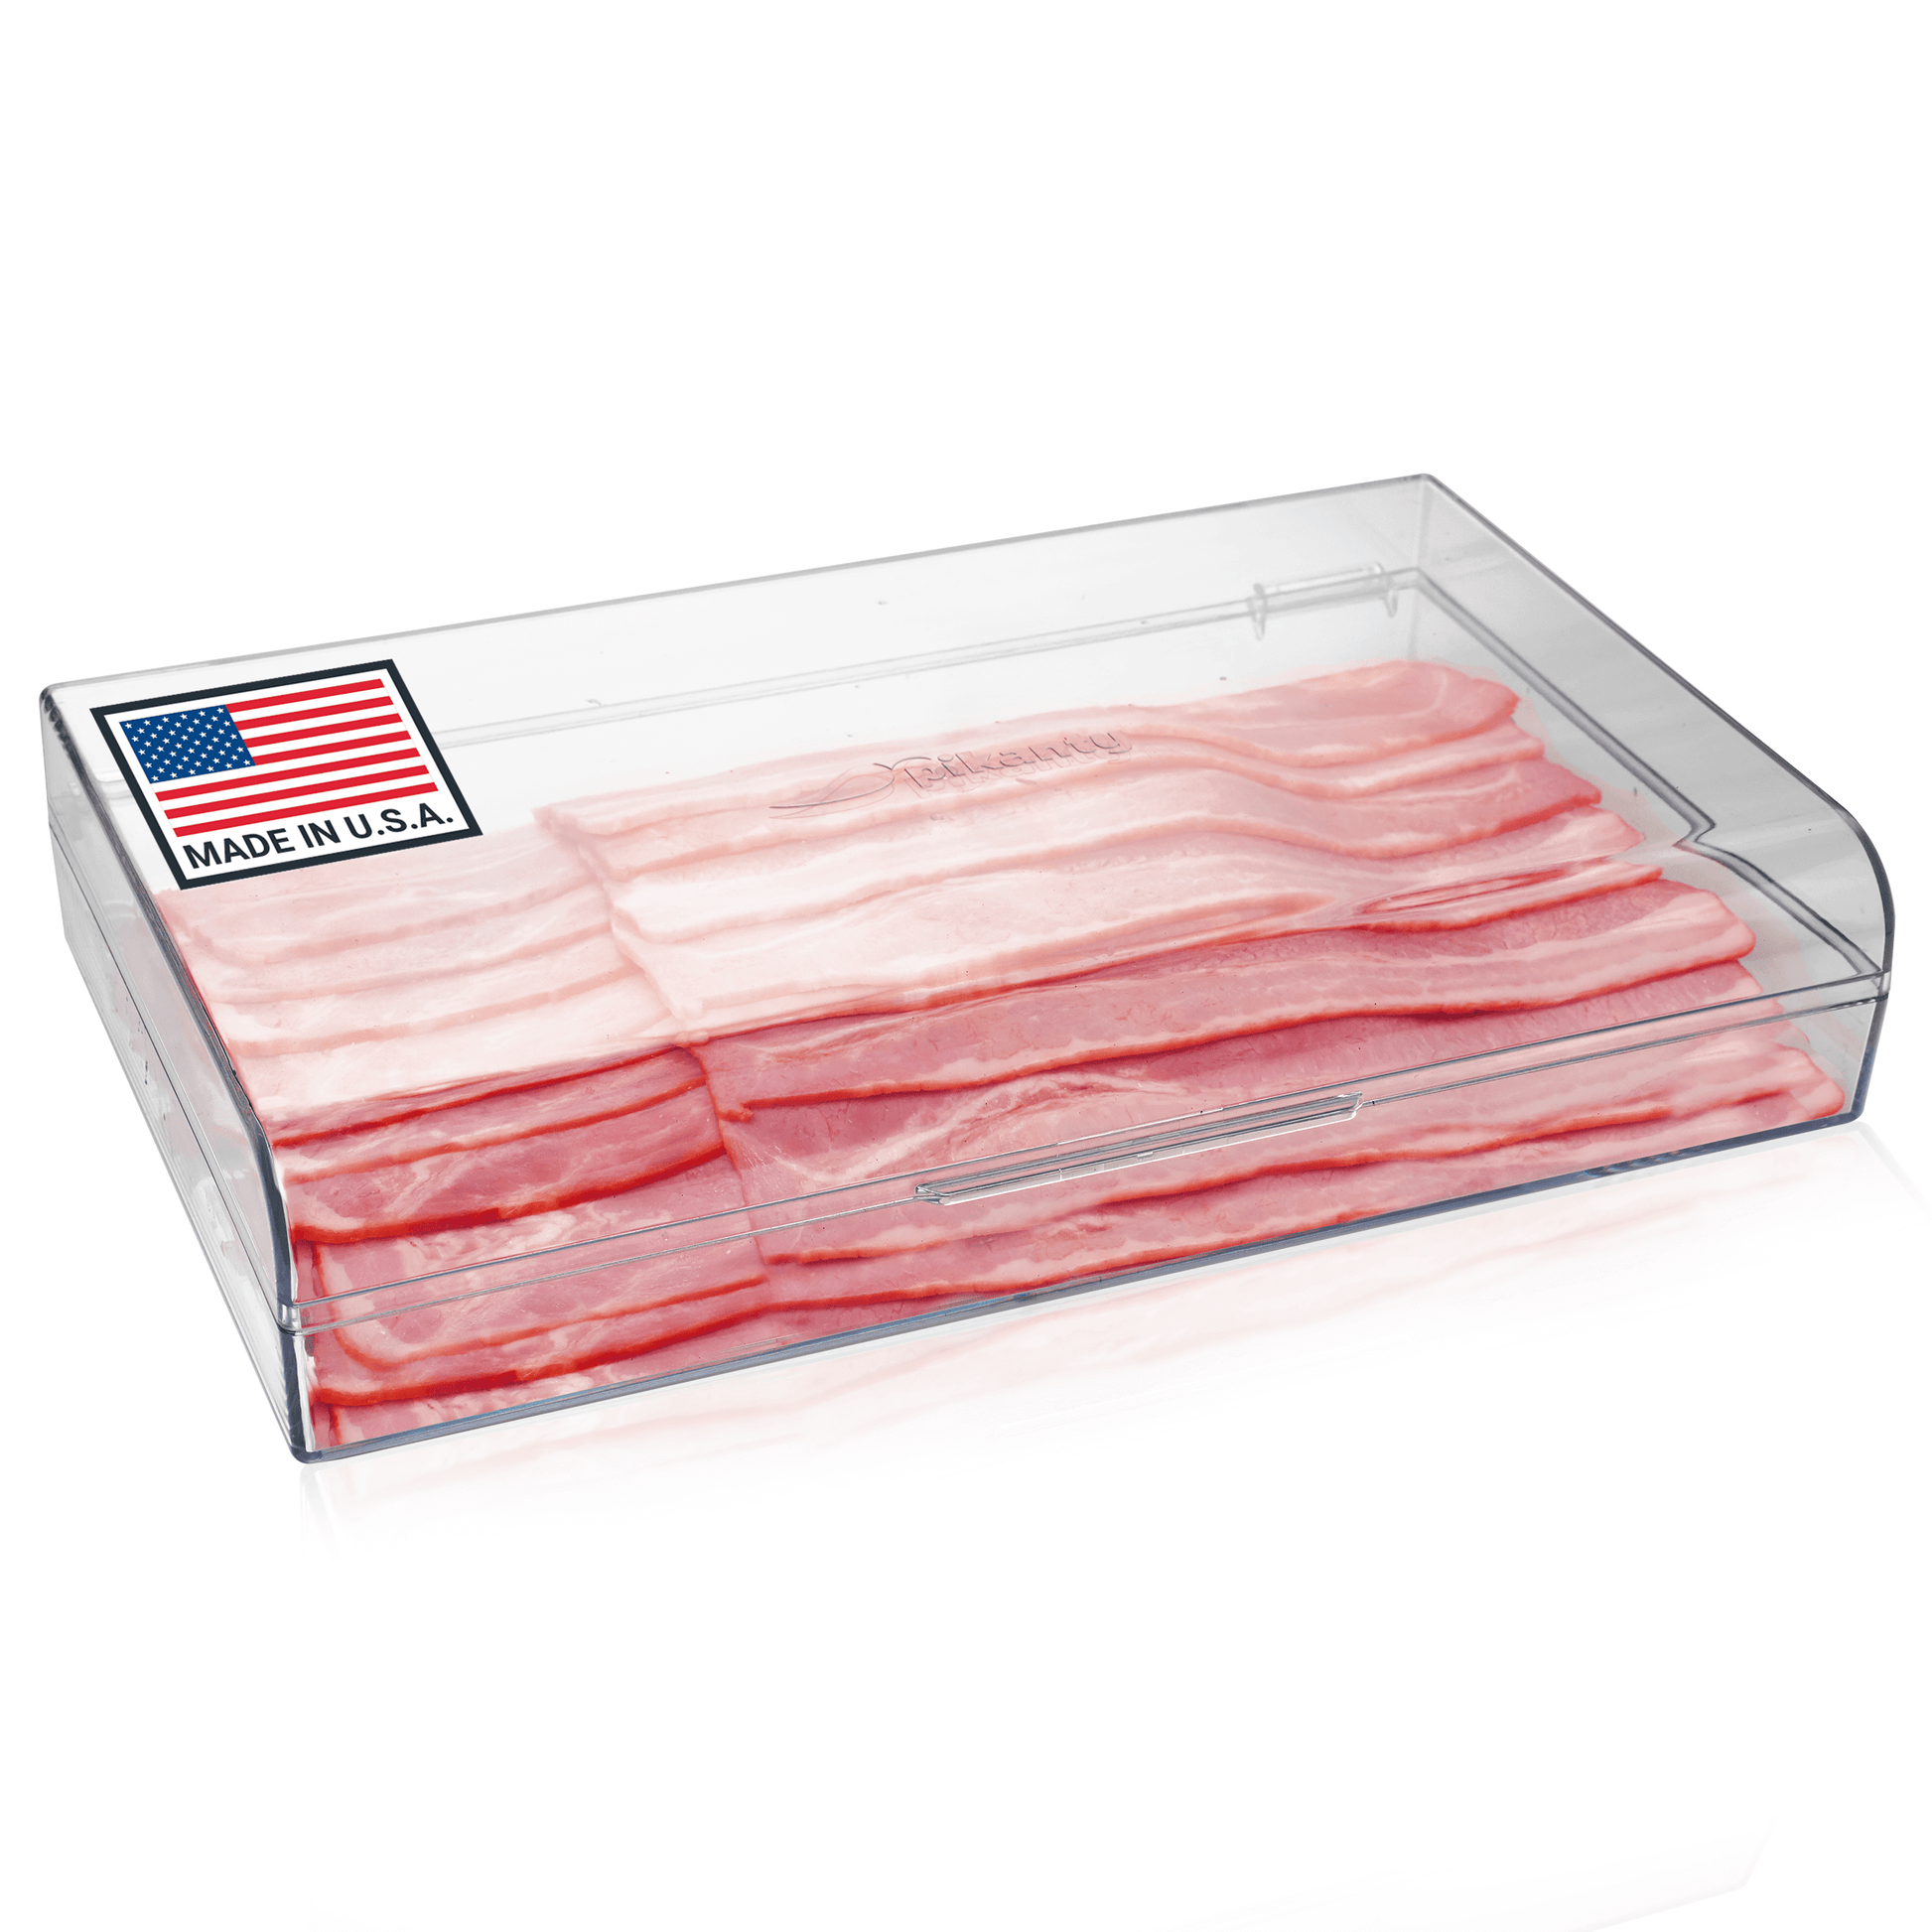  Pikanty - Deli meat container for fridge. Made in USA : Home &  Kitchen